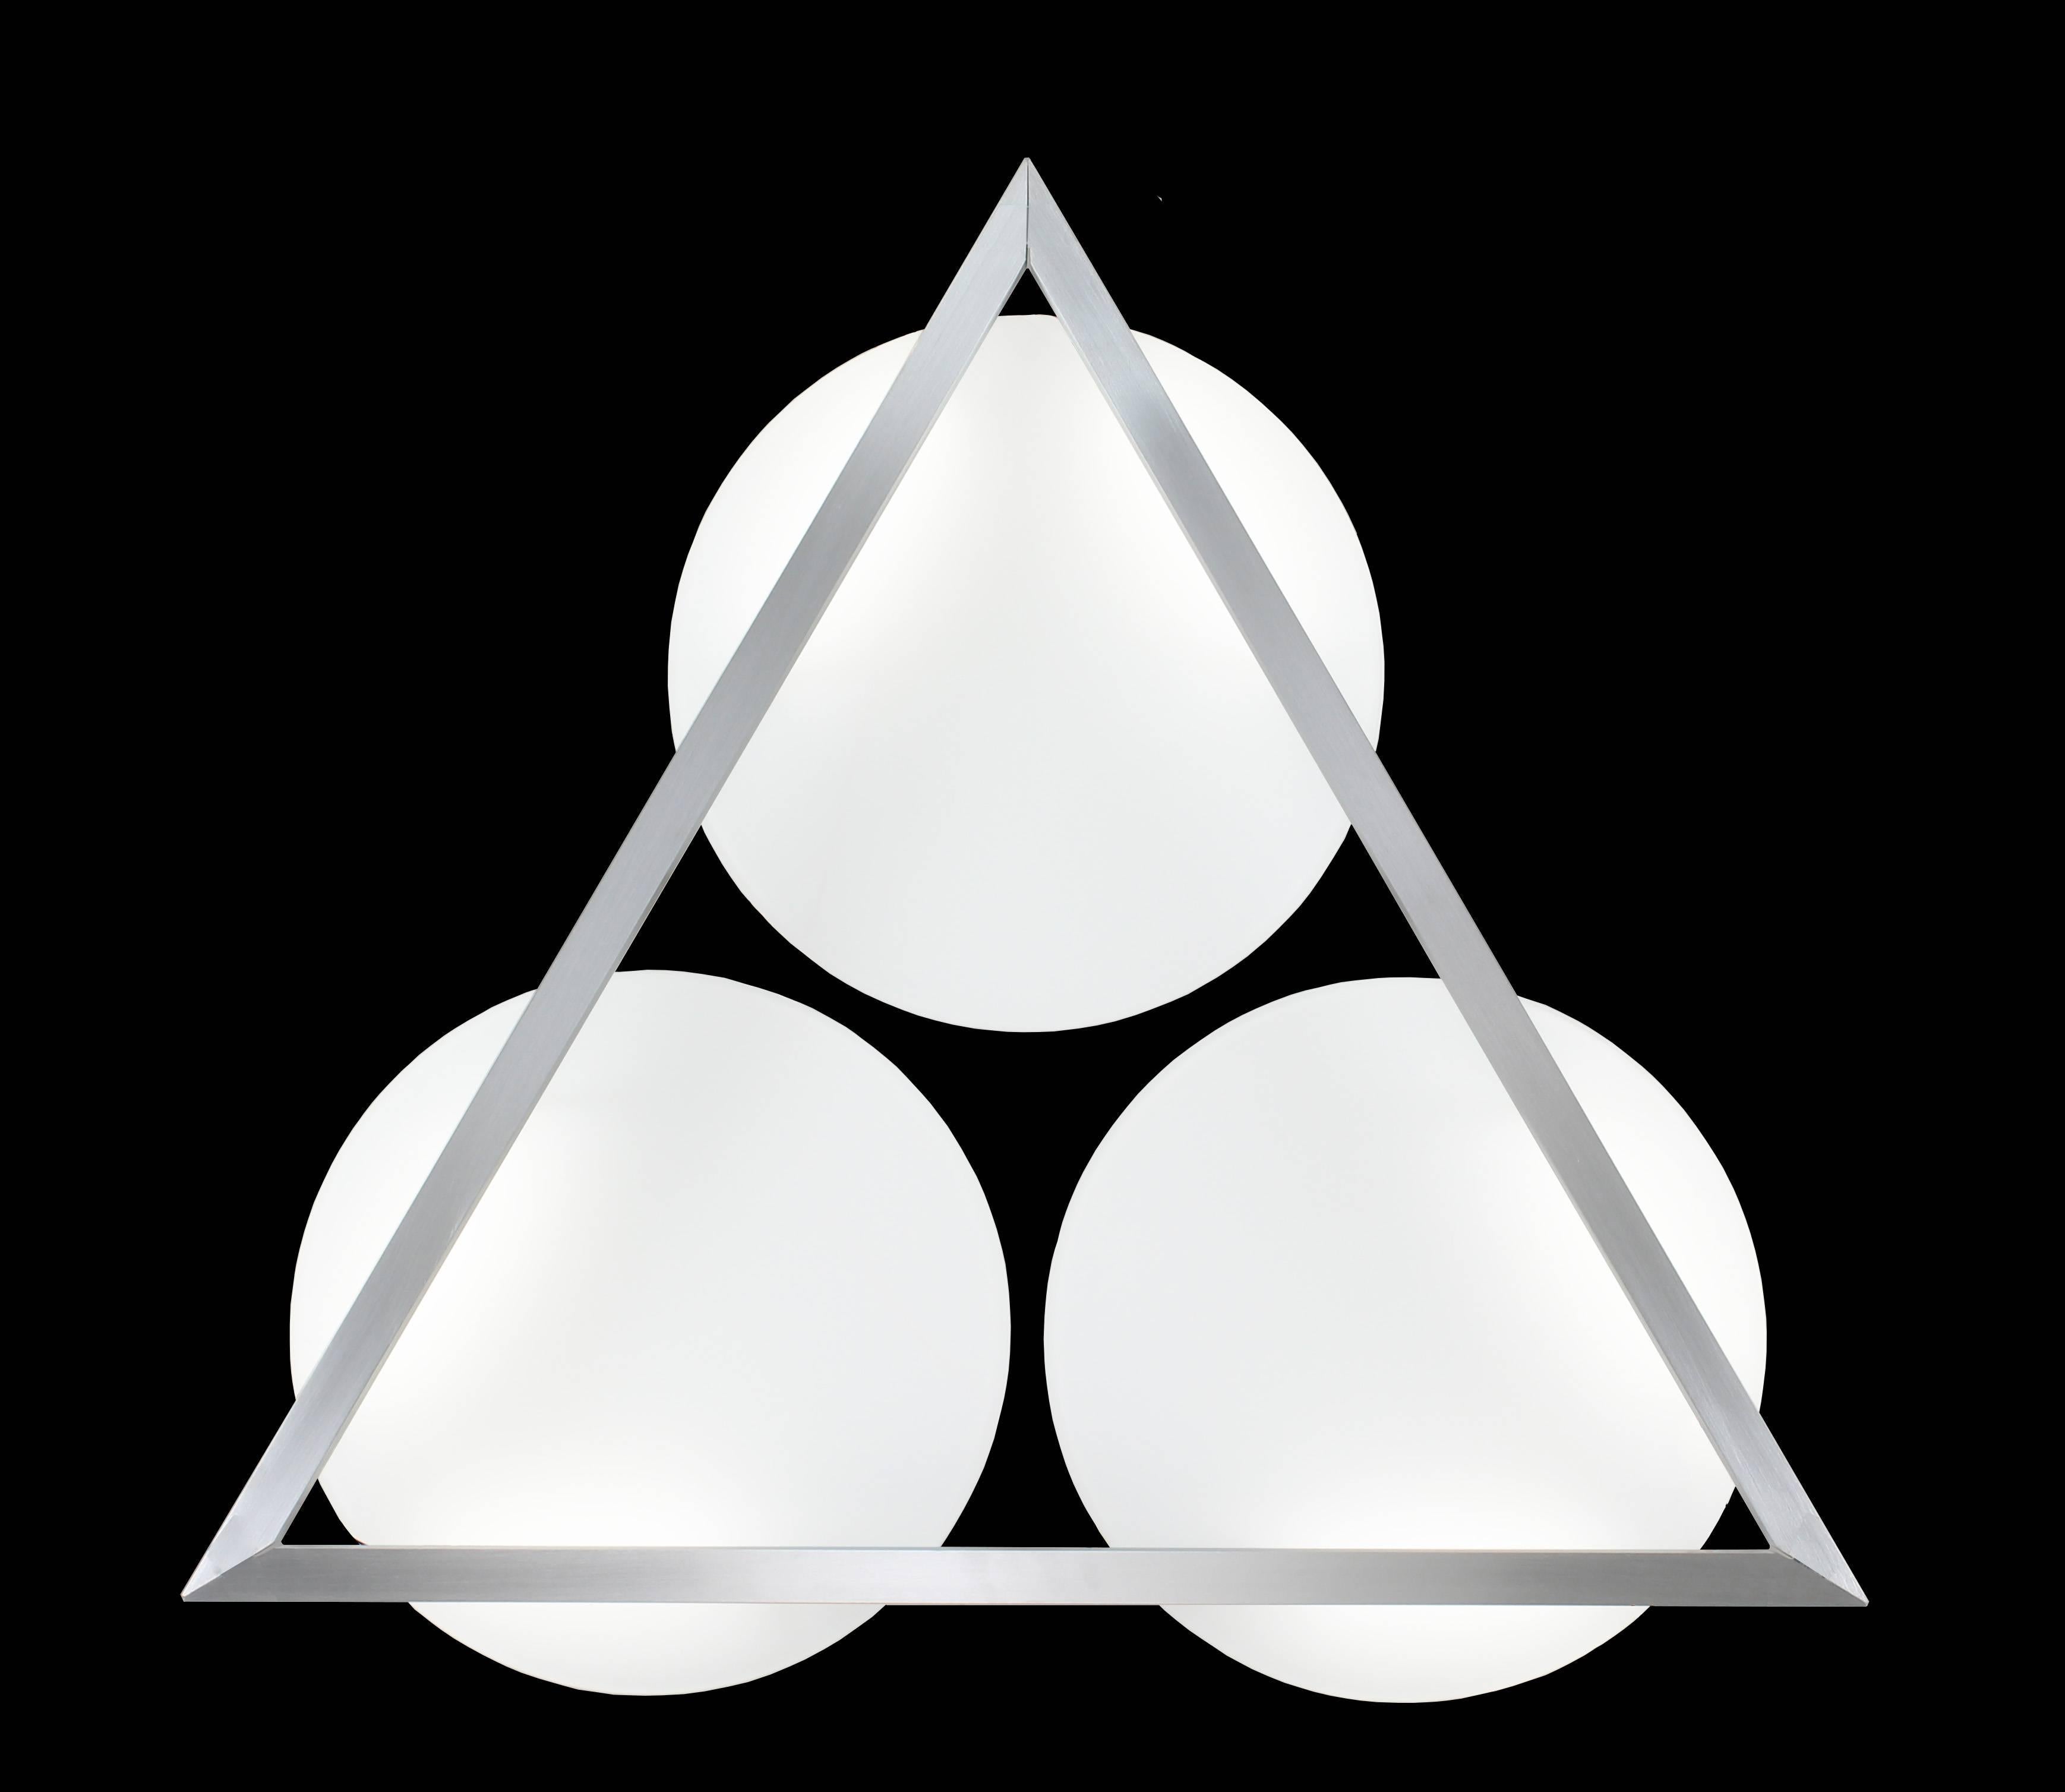 Triangular aluminium frame with white glass disks wall sculpture. Can be used in place of wall art as a decorative feature. In the manner of Mid-Century Modern design style with a Pop-Art feel. LED illuminated 3000K standard color